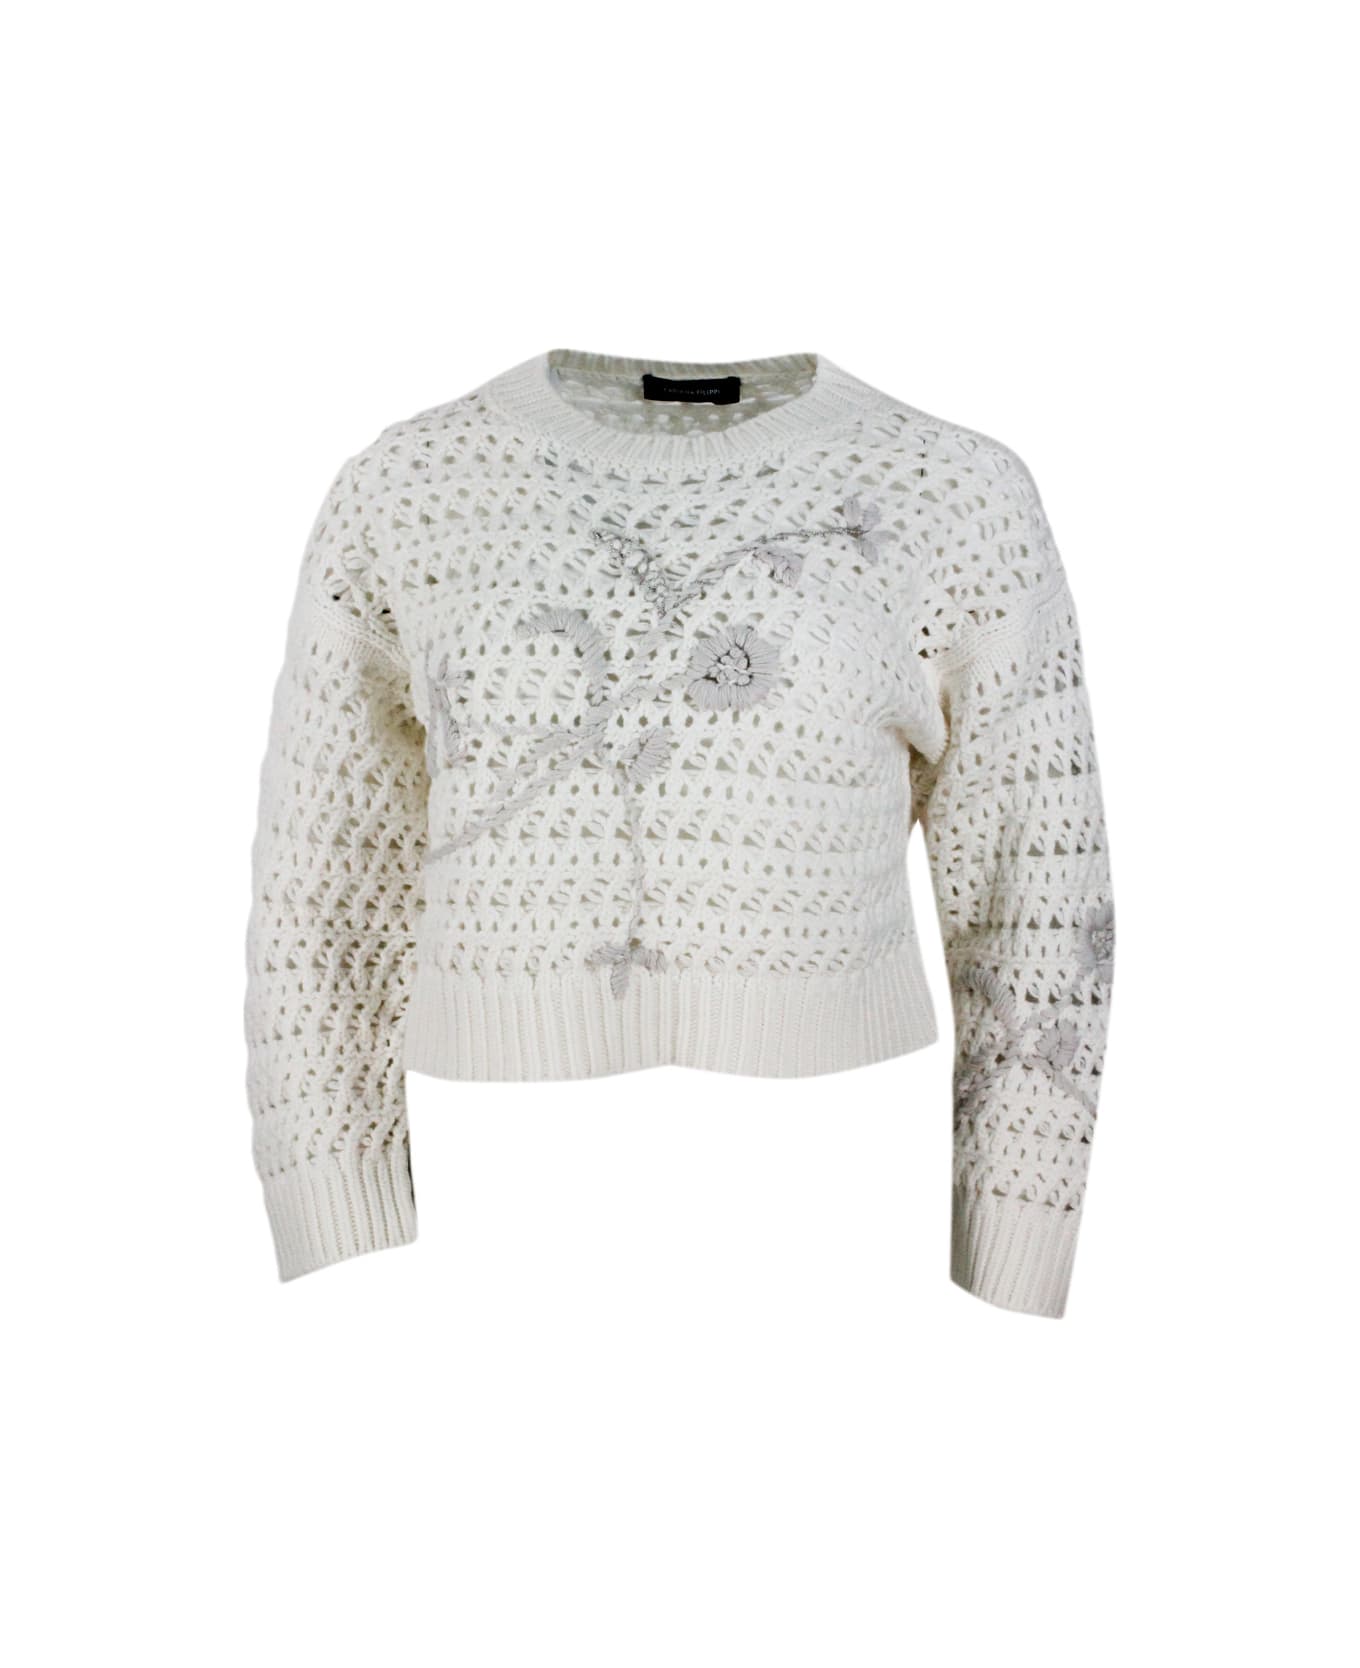 Fabiana Filippi Long-sleeved Round-neck Sweater In Platinum Wool, Silk And Cashmere Yarn With Embroidery And Chain Of Brilliant Jewels On The Front - cream カーディガン